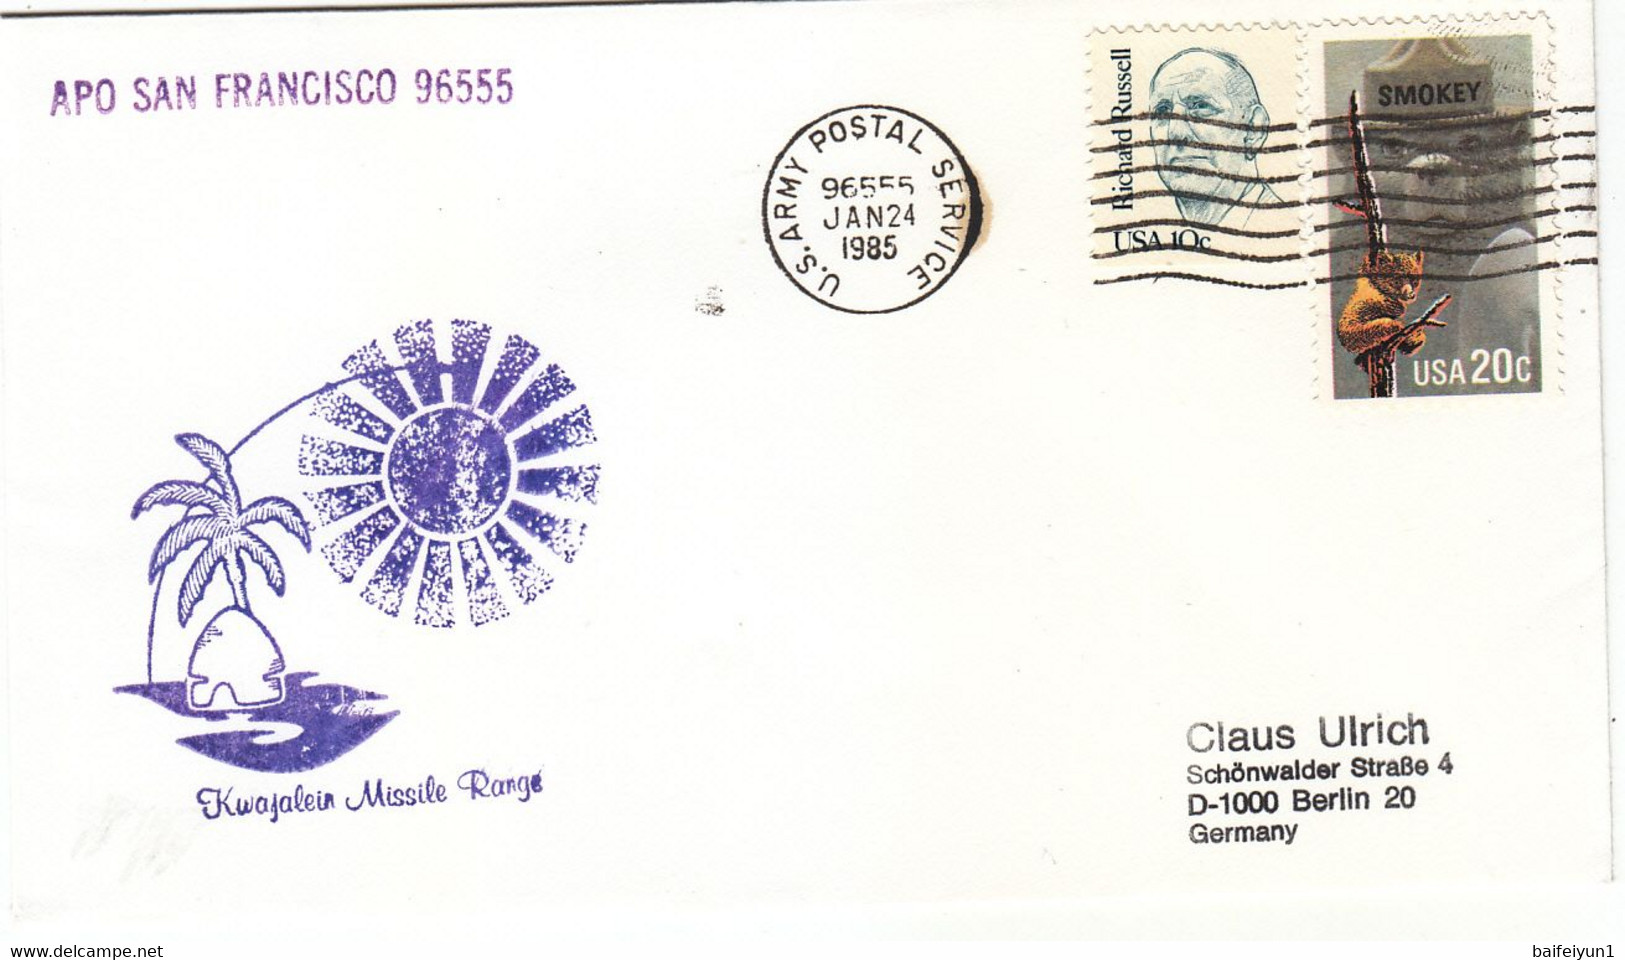 1985 USA  Space Shuttle Discovery STS-51C Mission And  Missile Range Commemorative Cover - North  America